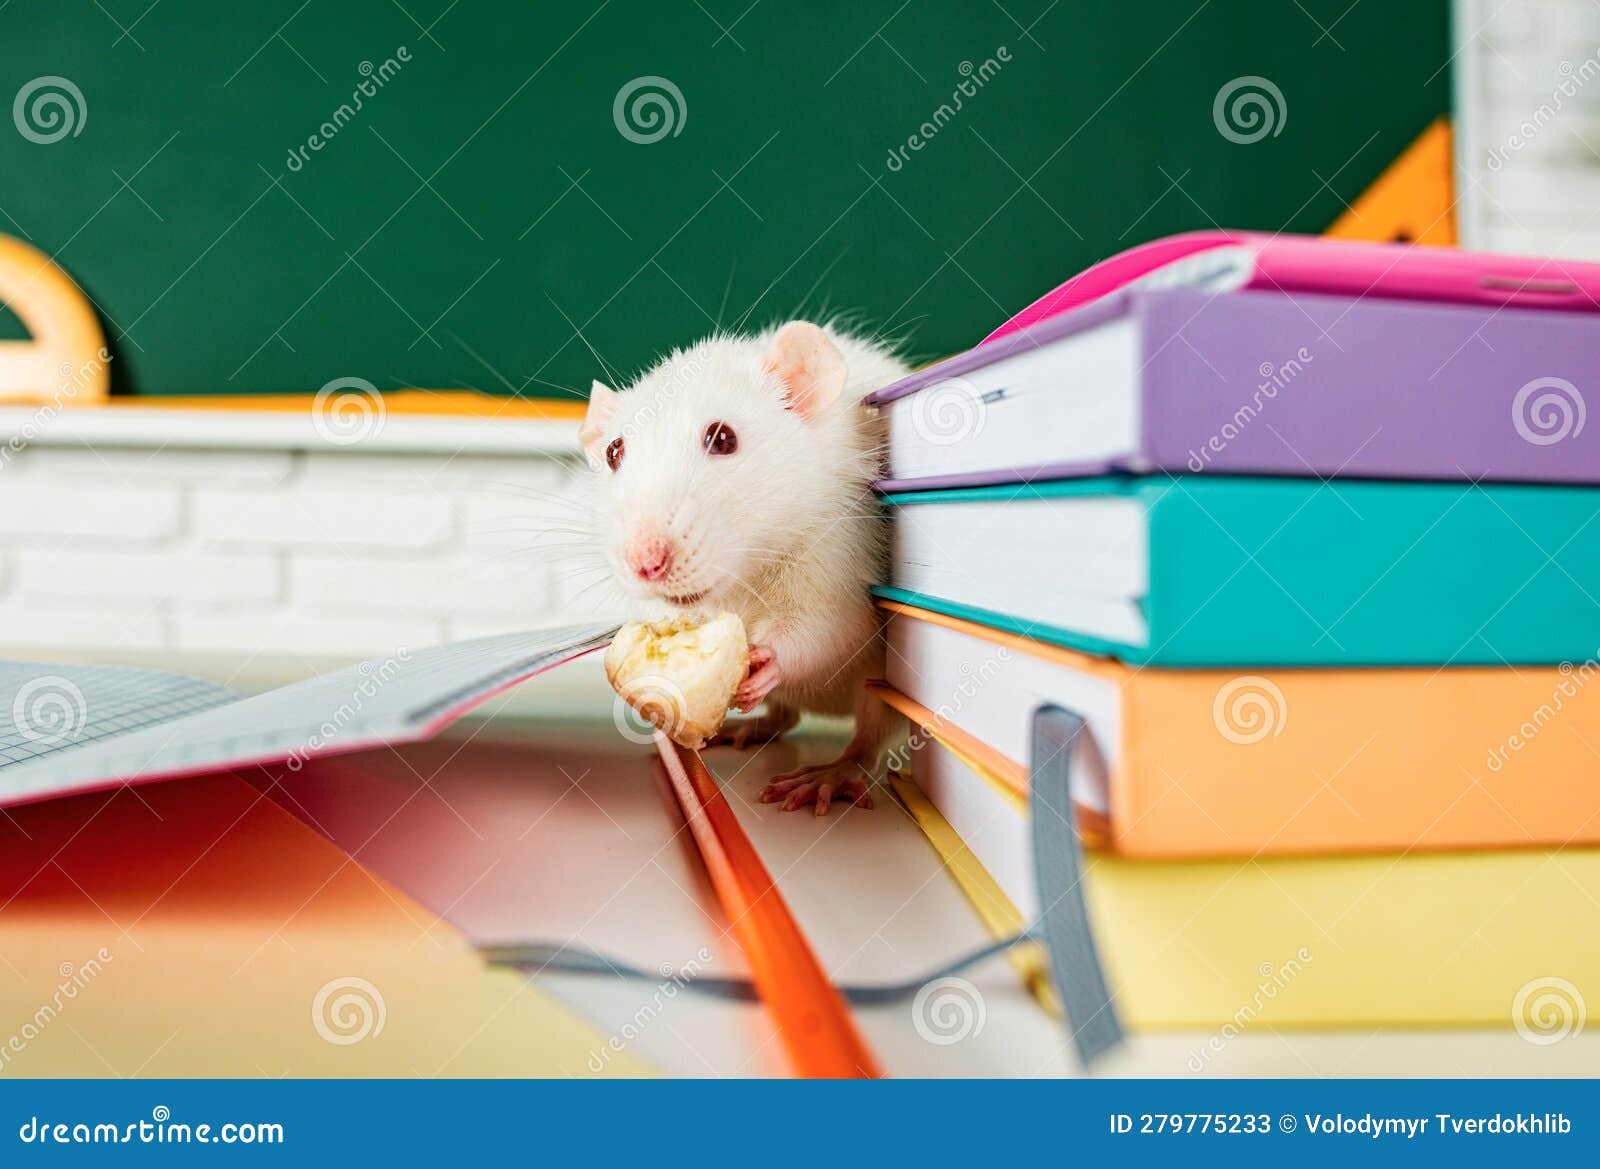 Education, Science, School, Learn and Study Concep. Funny Animals ...